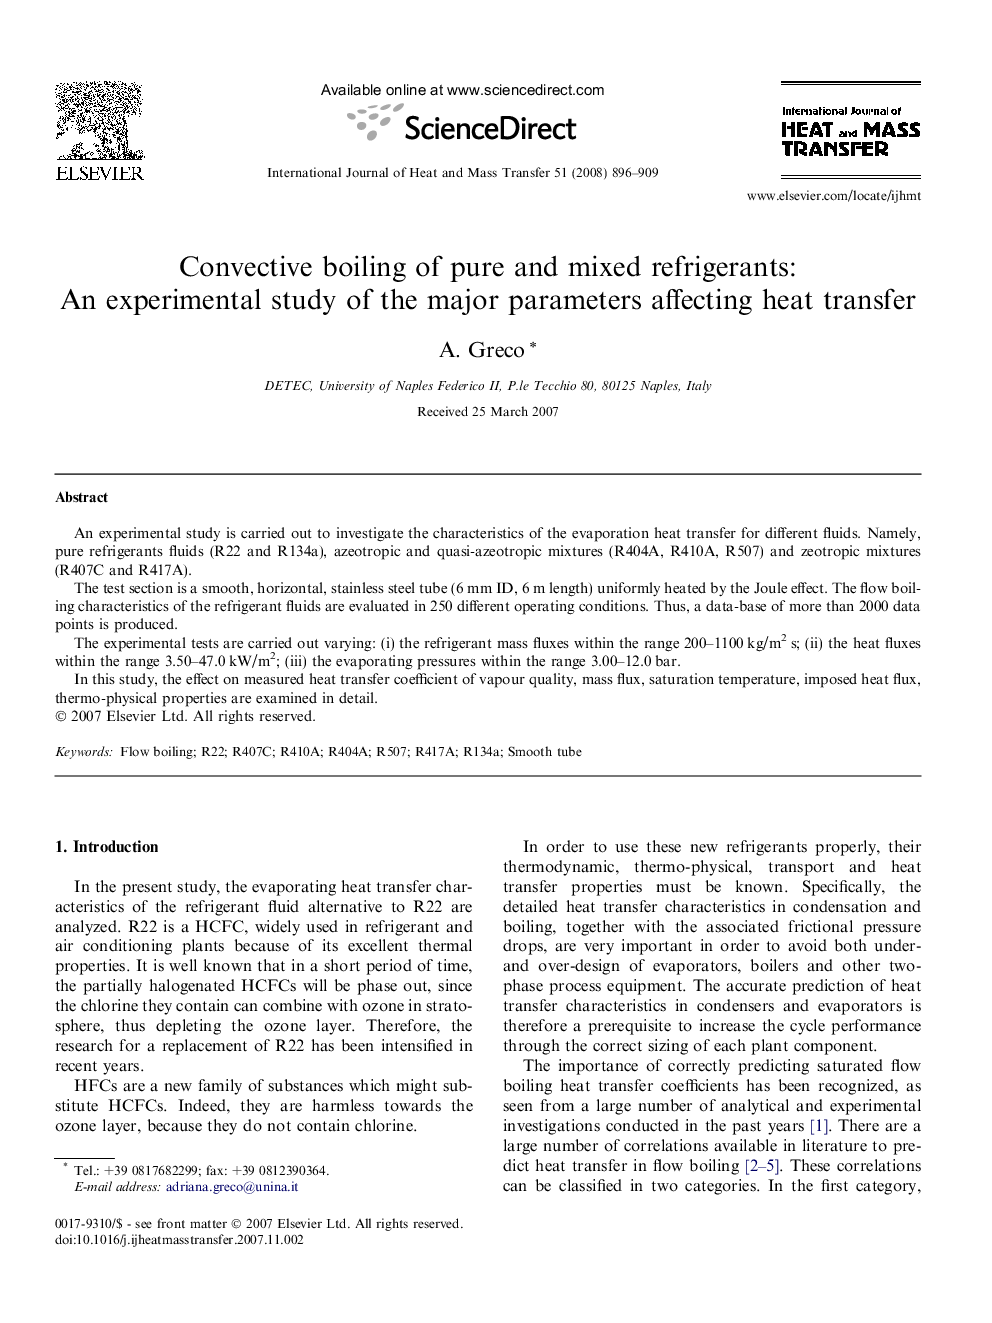 Convective boiling of pure and mixed refrigerants: An experimental study of the major parameters affecting heat transfer